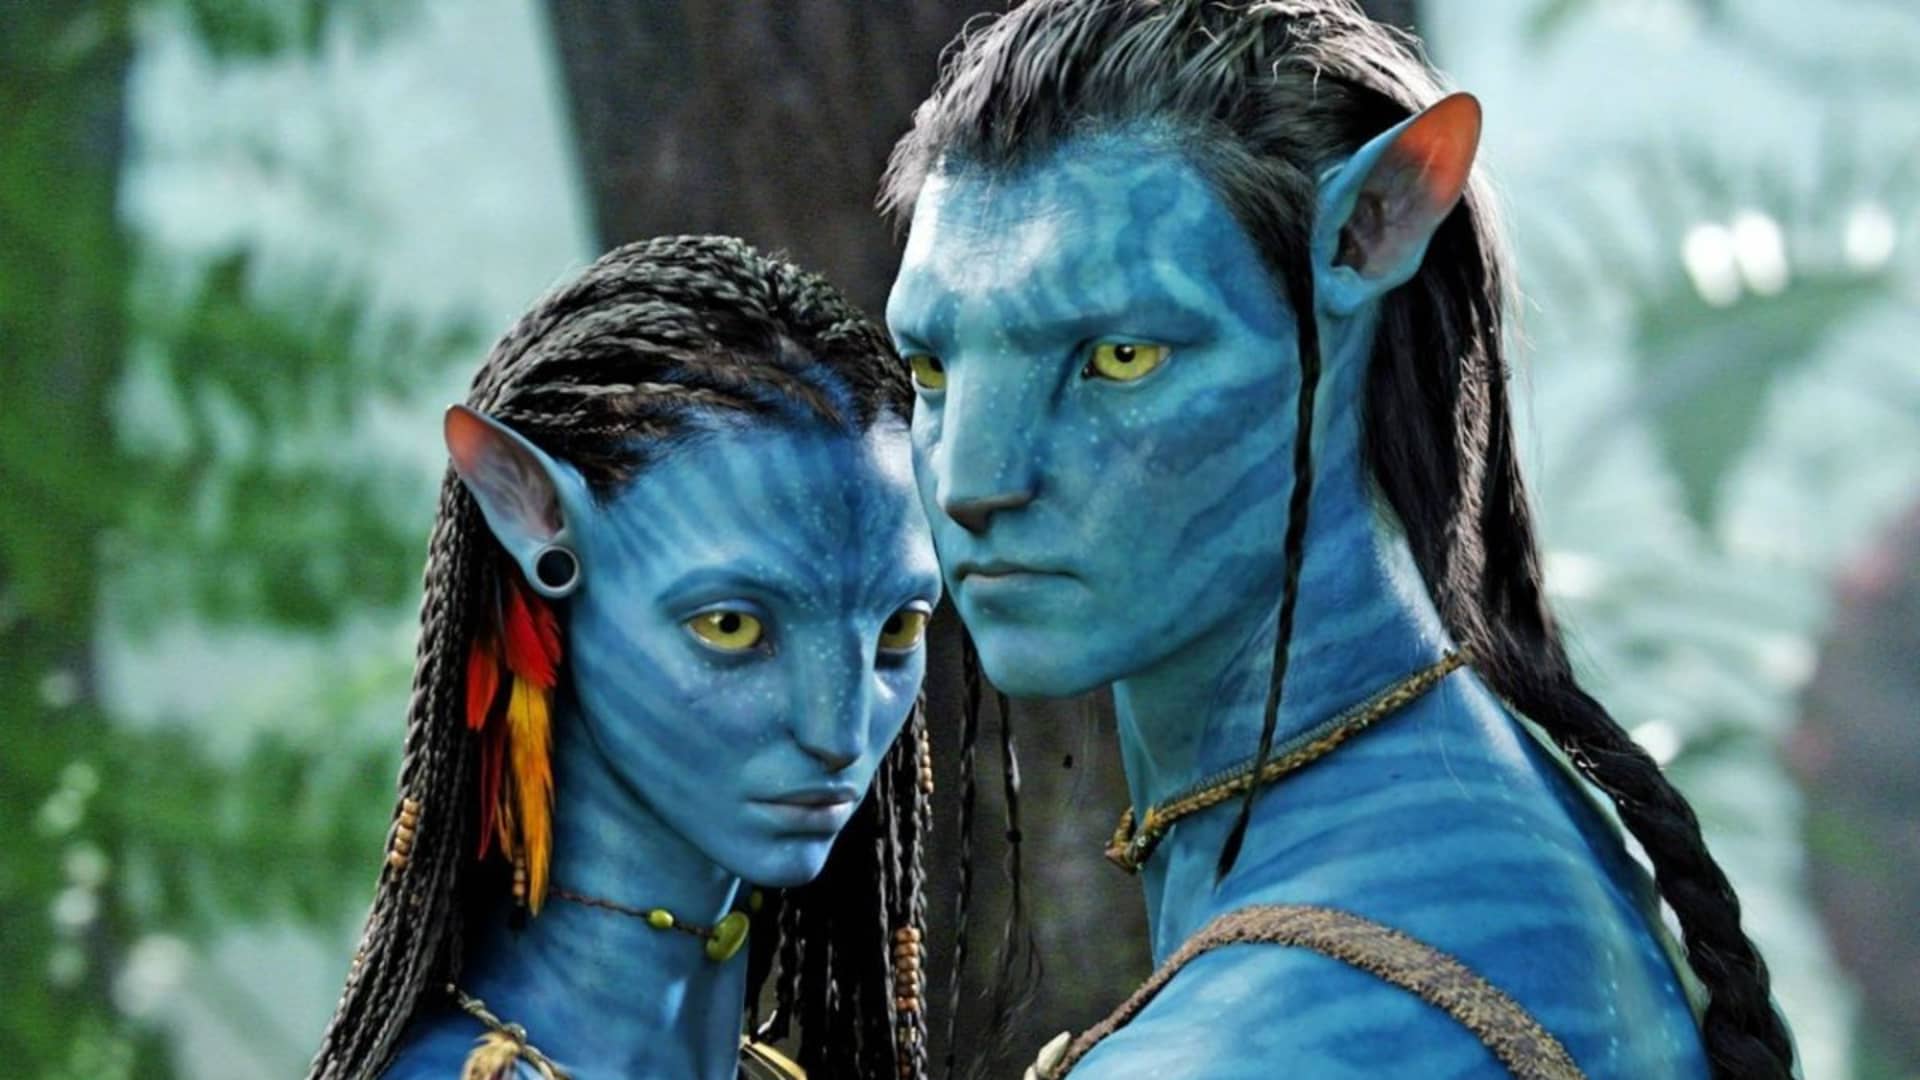 ‘Avatar’ re-release shows franchise’s overseas strength